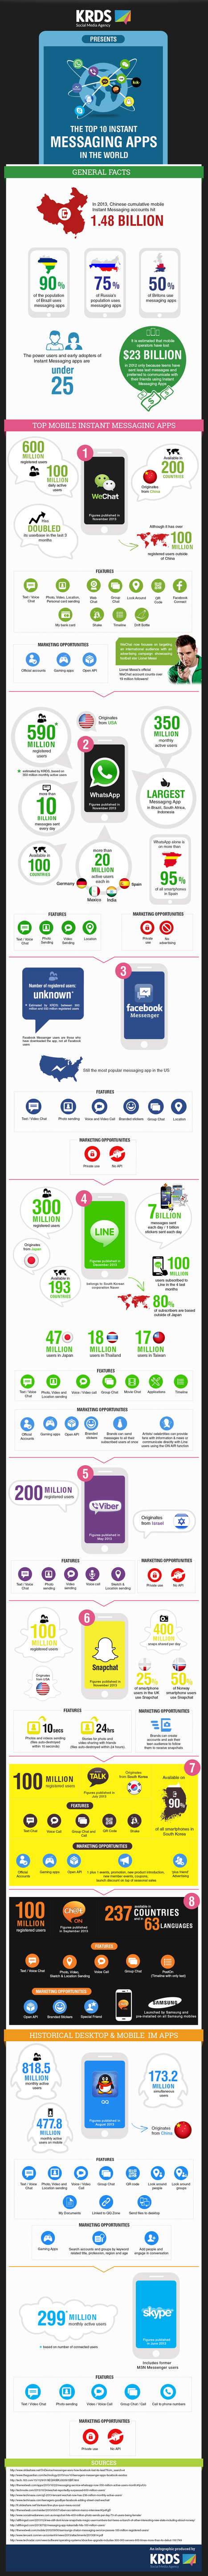 Infographic: the Top 10 Instant Messaging Apps in the world, by KRDS | Digital-News on Scoop.it today | Scoop.it